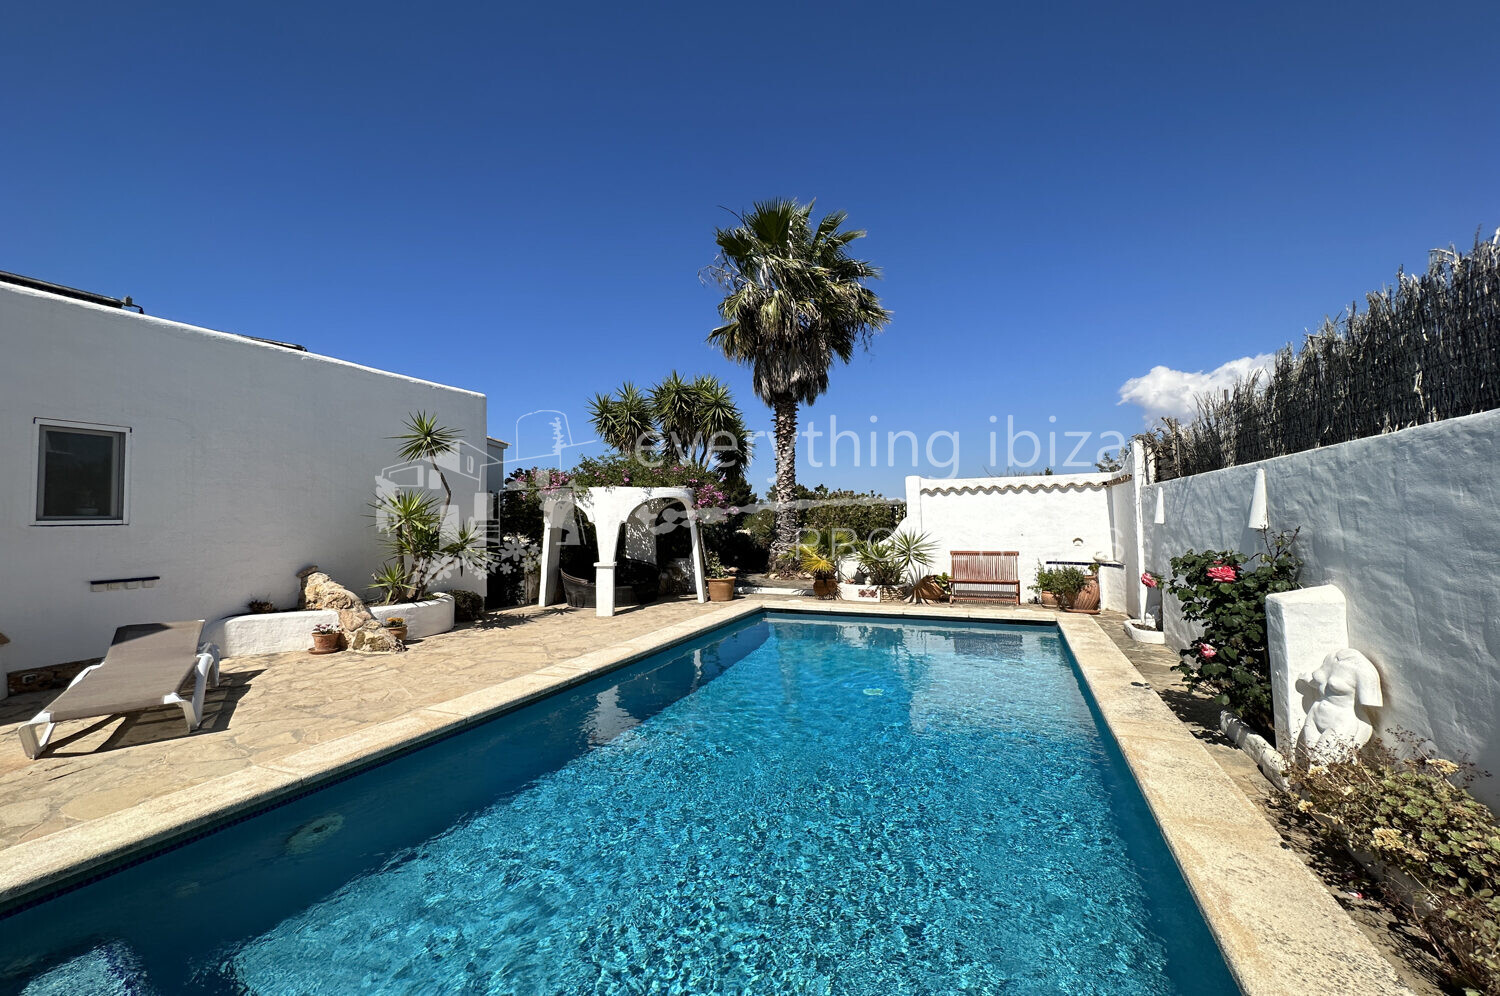 Charming Homely Villa with Lots of Character and Private Pool, ref. 1603, for sale in Ibiza by everything ibiza Properties